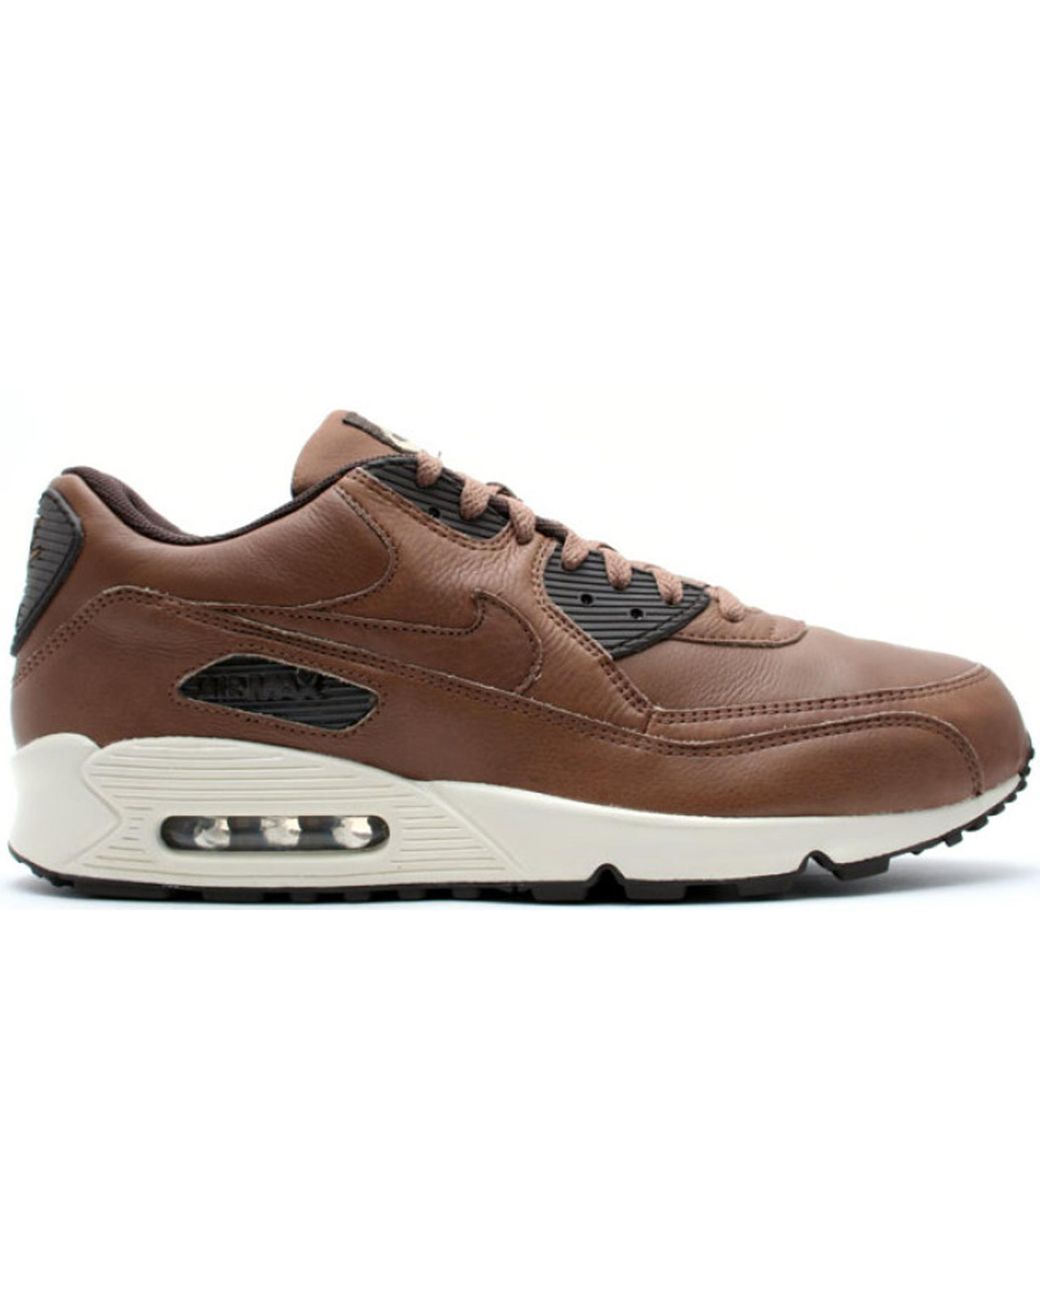 Nike Air Max 90 Bison Baroque Brown for 